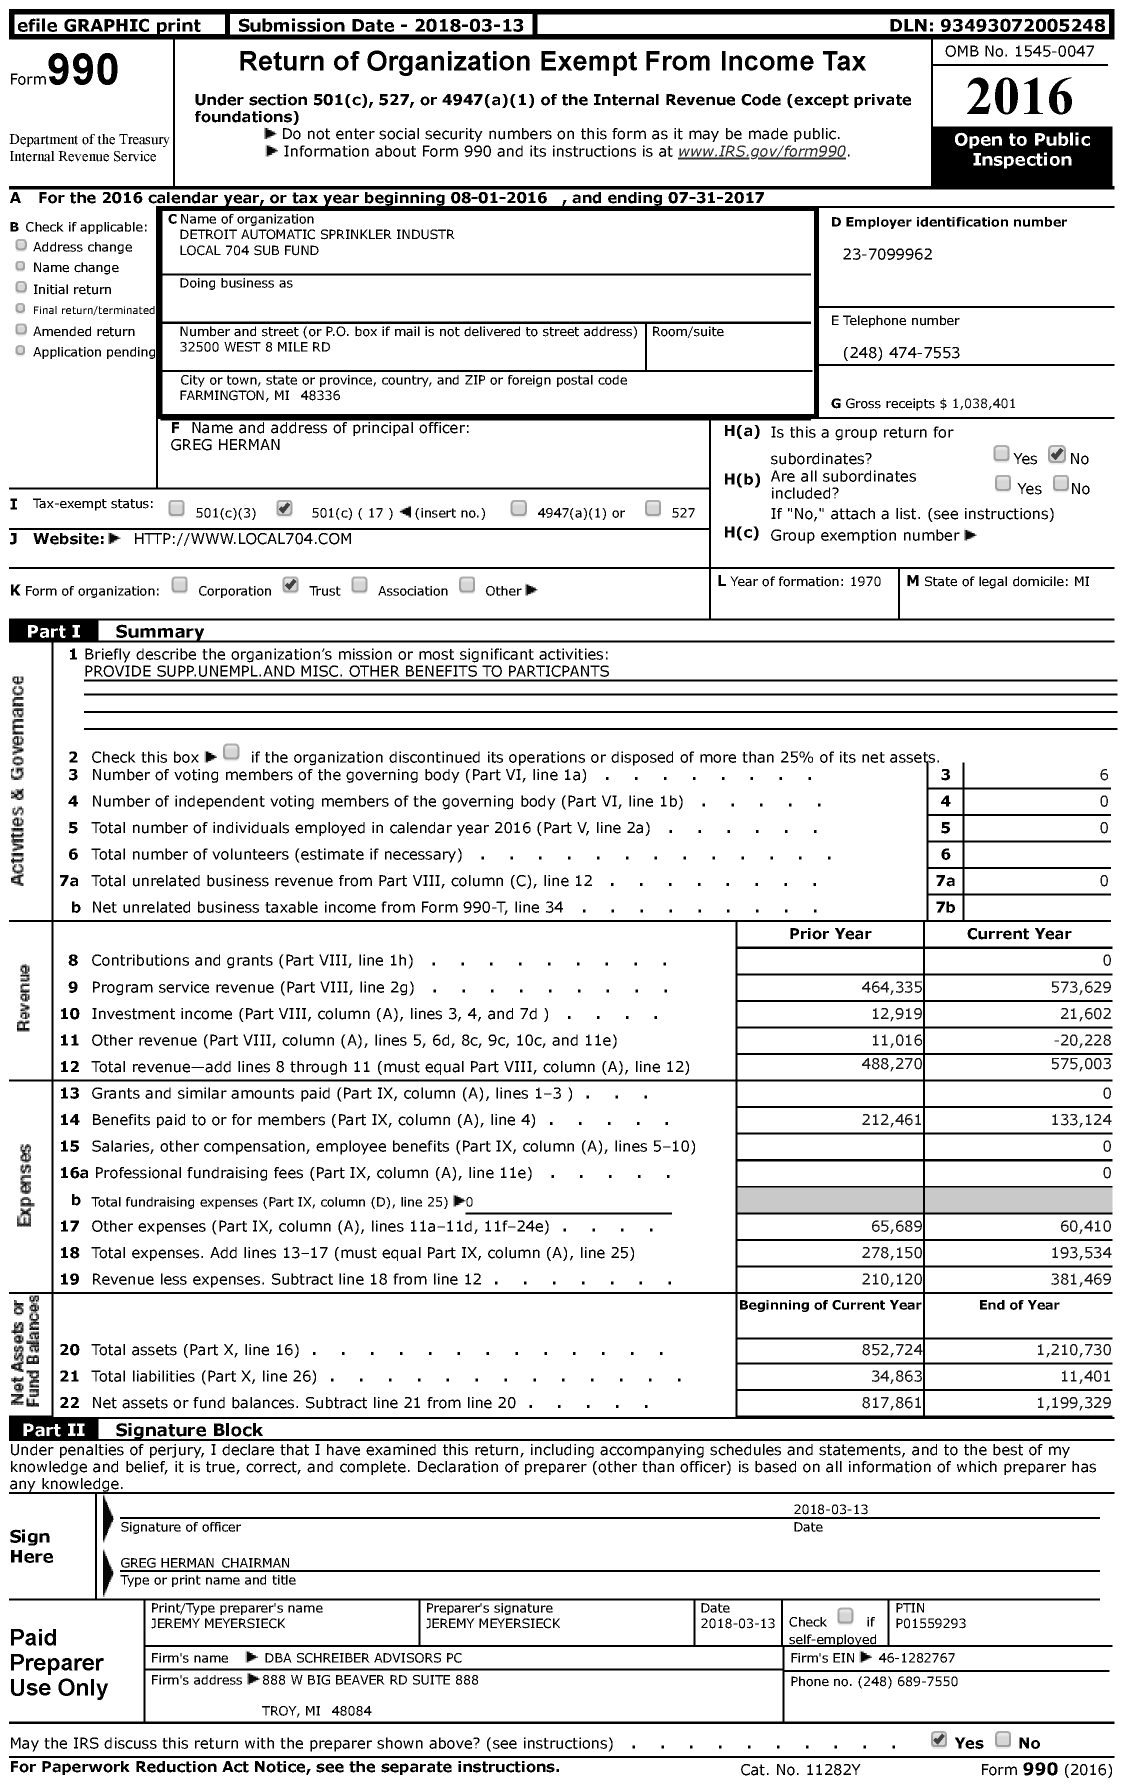 Image of first page of 2016 Form 990 for Detroit Automatic Sprinkler Local 704 Sub Fund